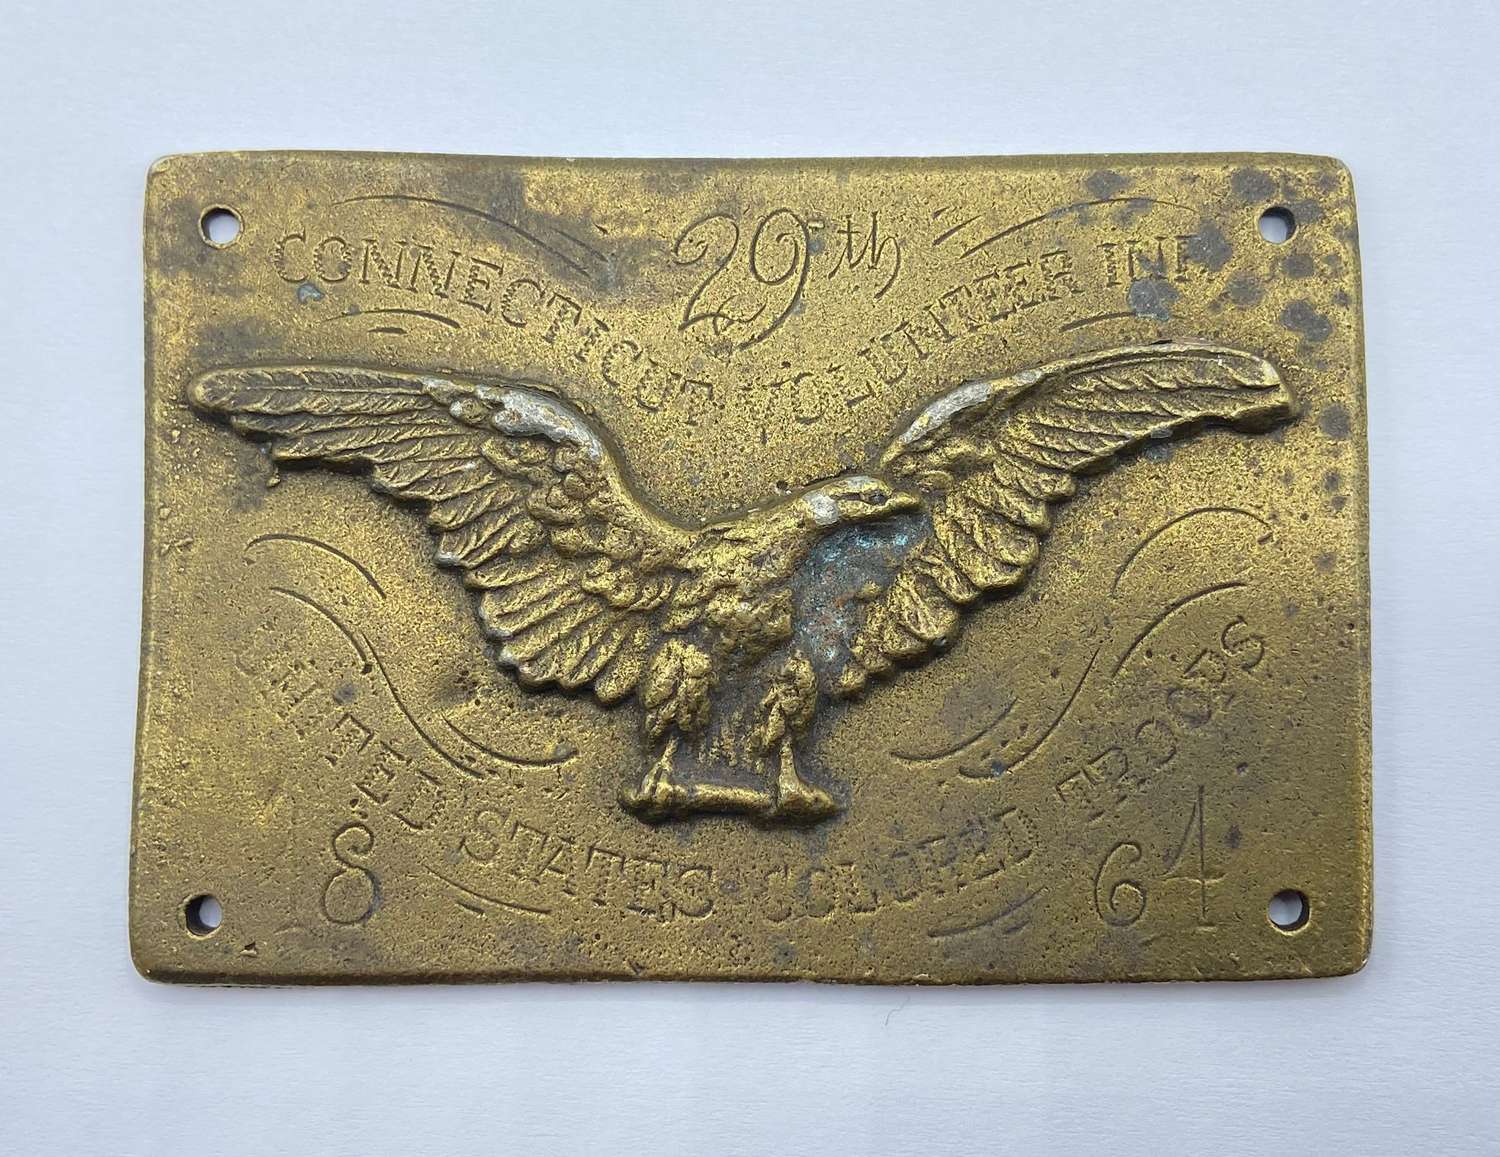 US Civil War 29th Connecticut Volunteer Inf Colored Troops Trunk Plate